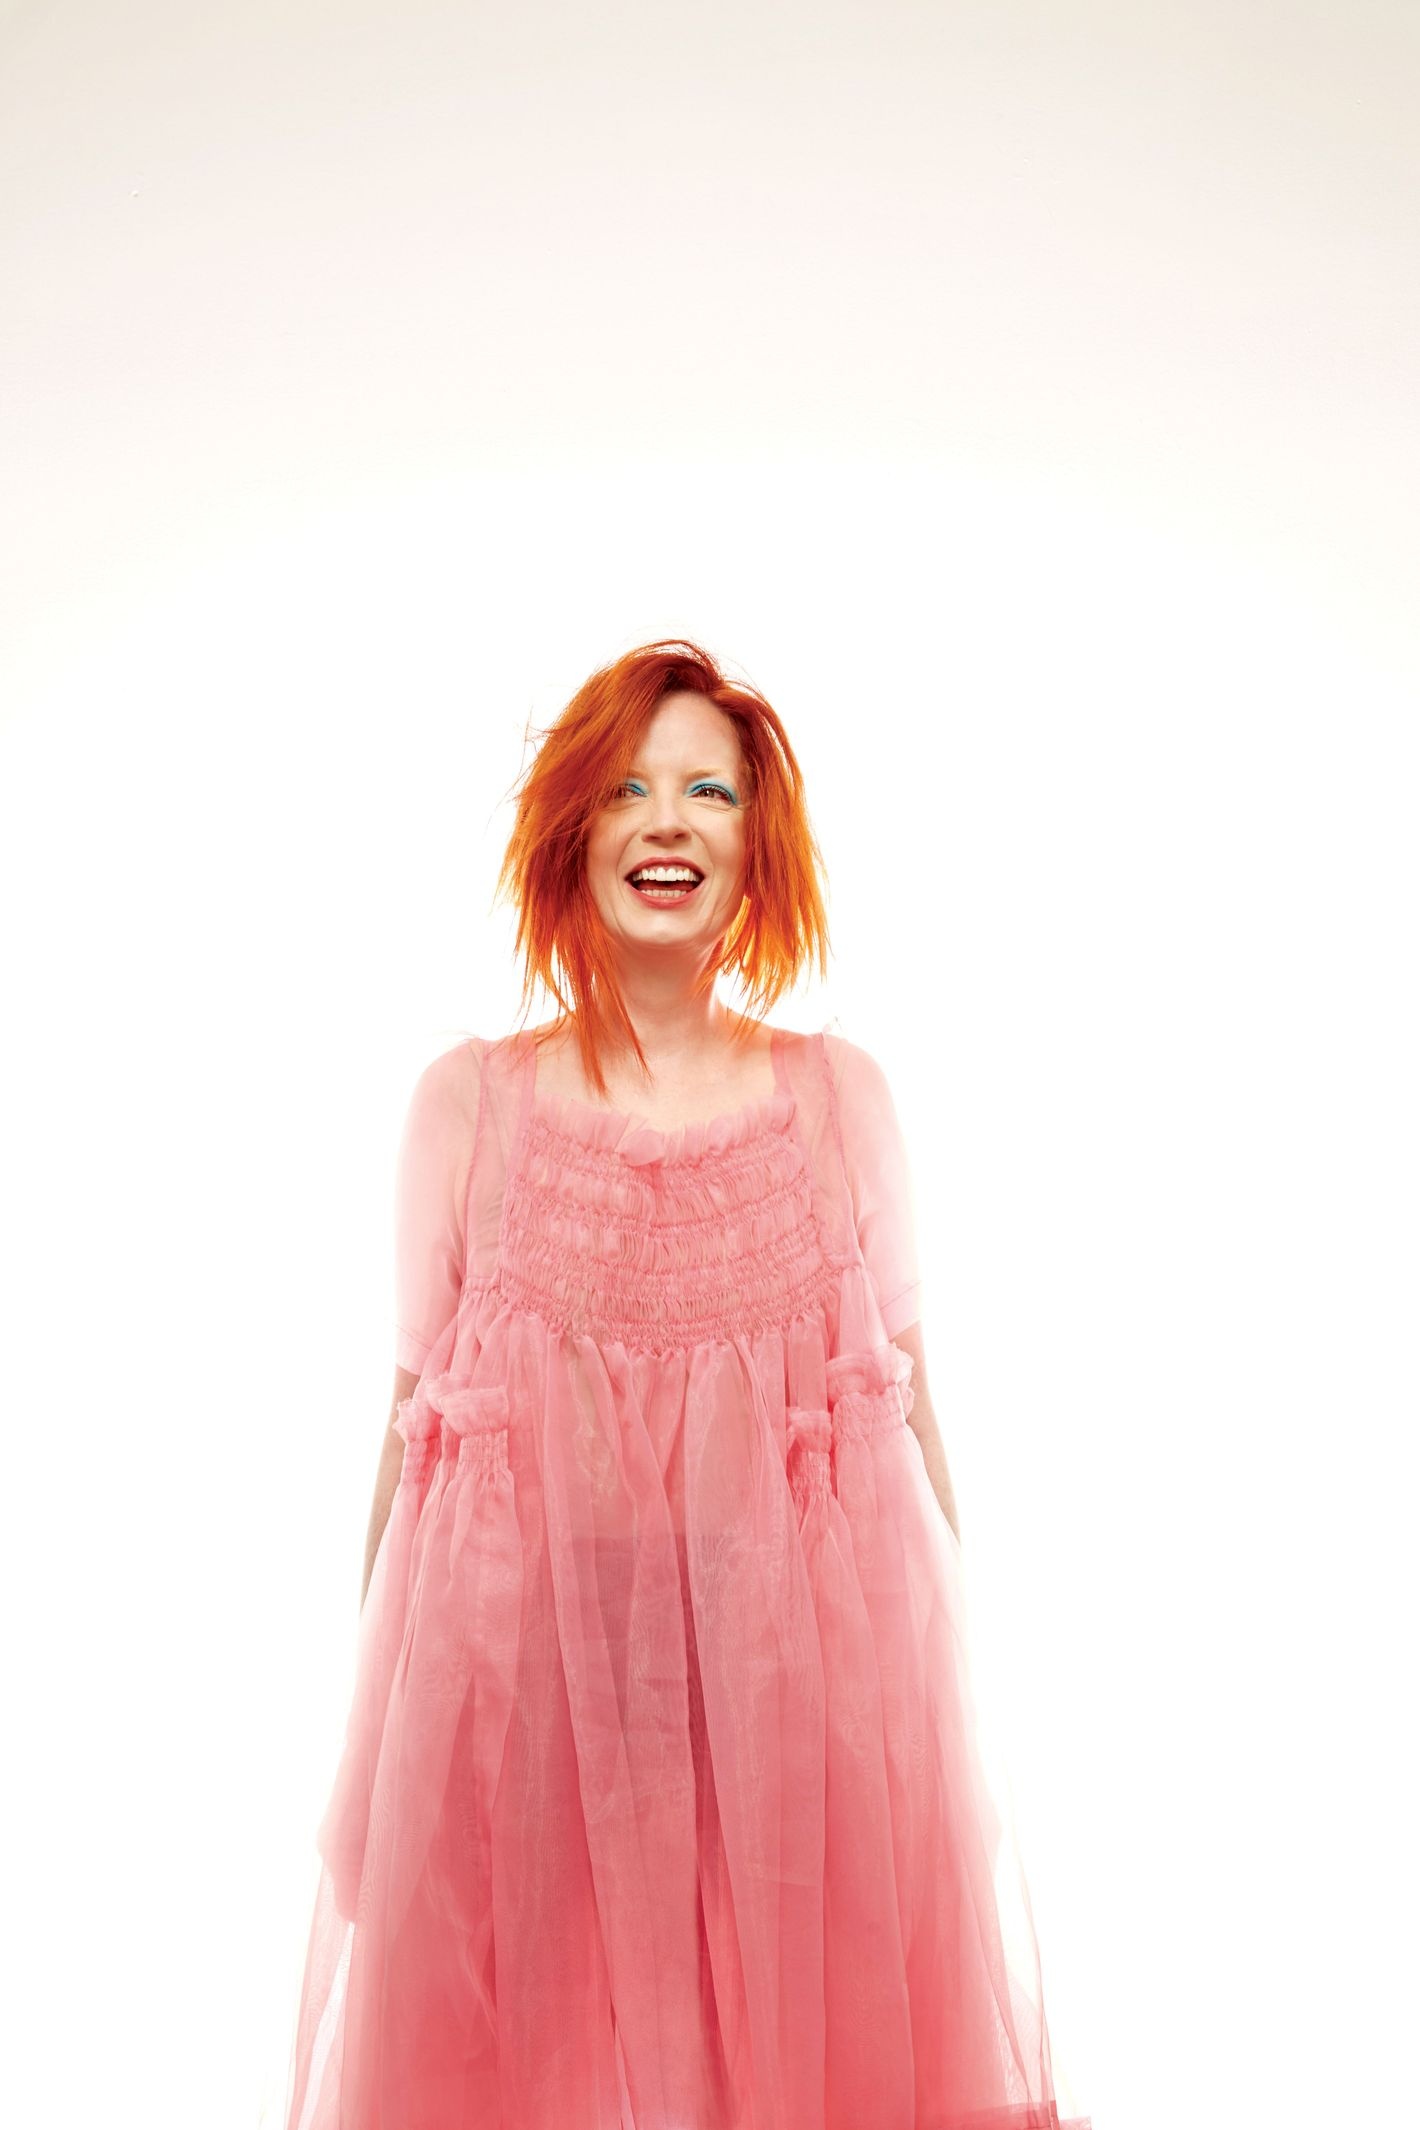 Shirley Manson, Cementing her place, Female rockstar, Bold and fearless, 1420x2130 HD Handy